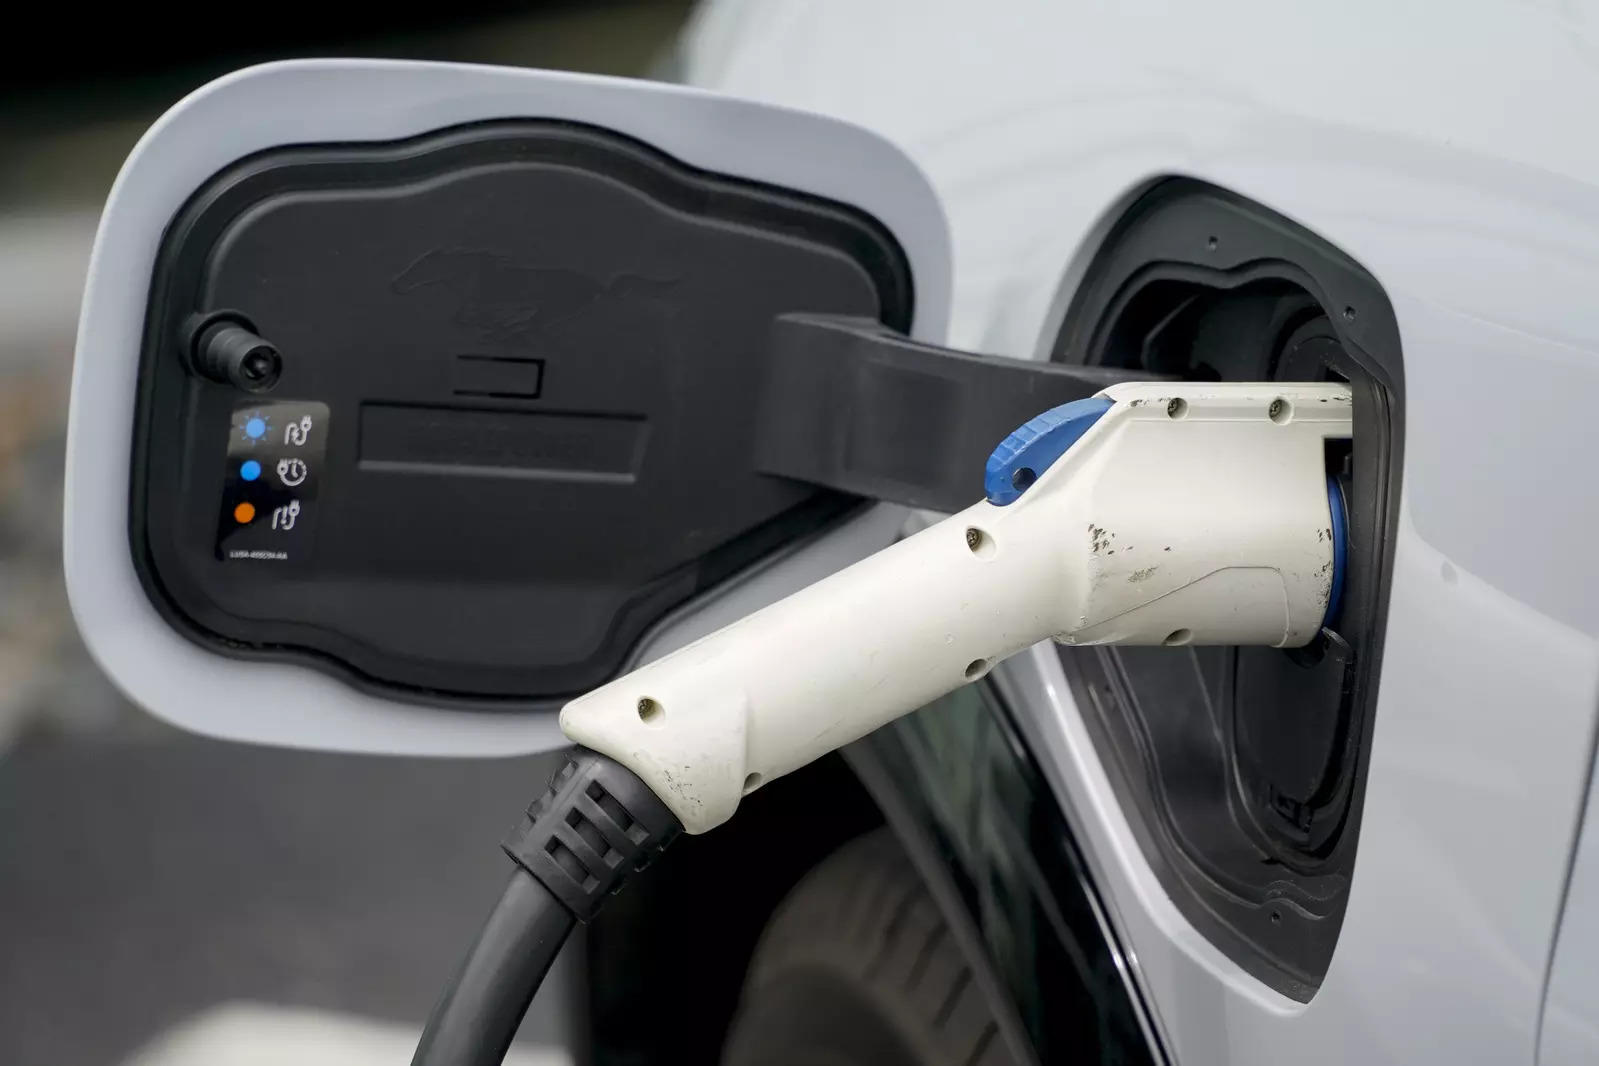 Automakers targeting average households with new crop of EVs